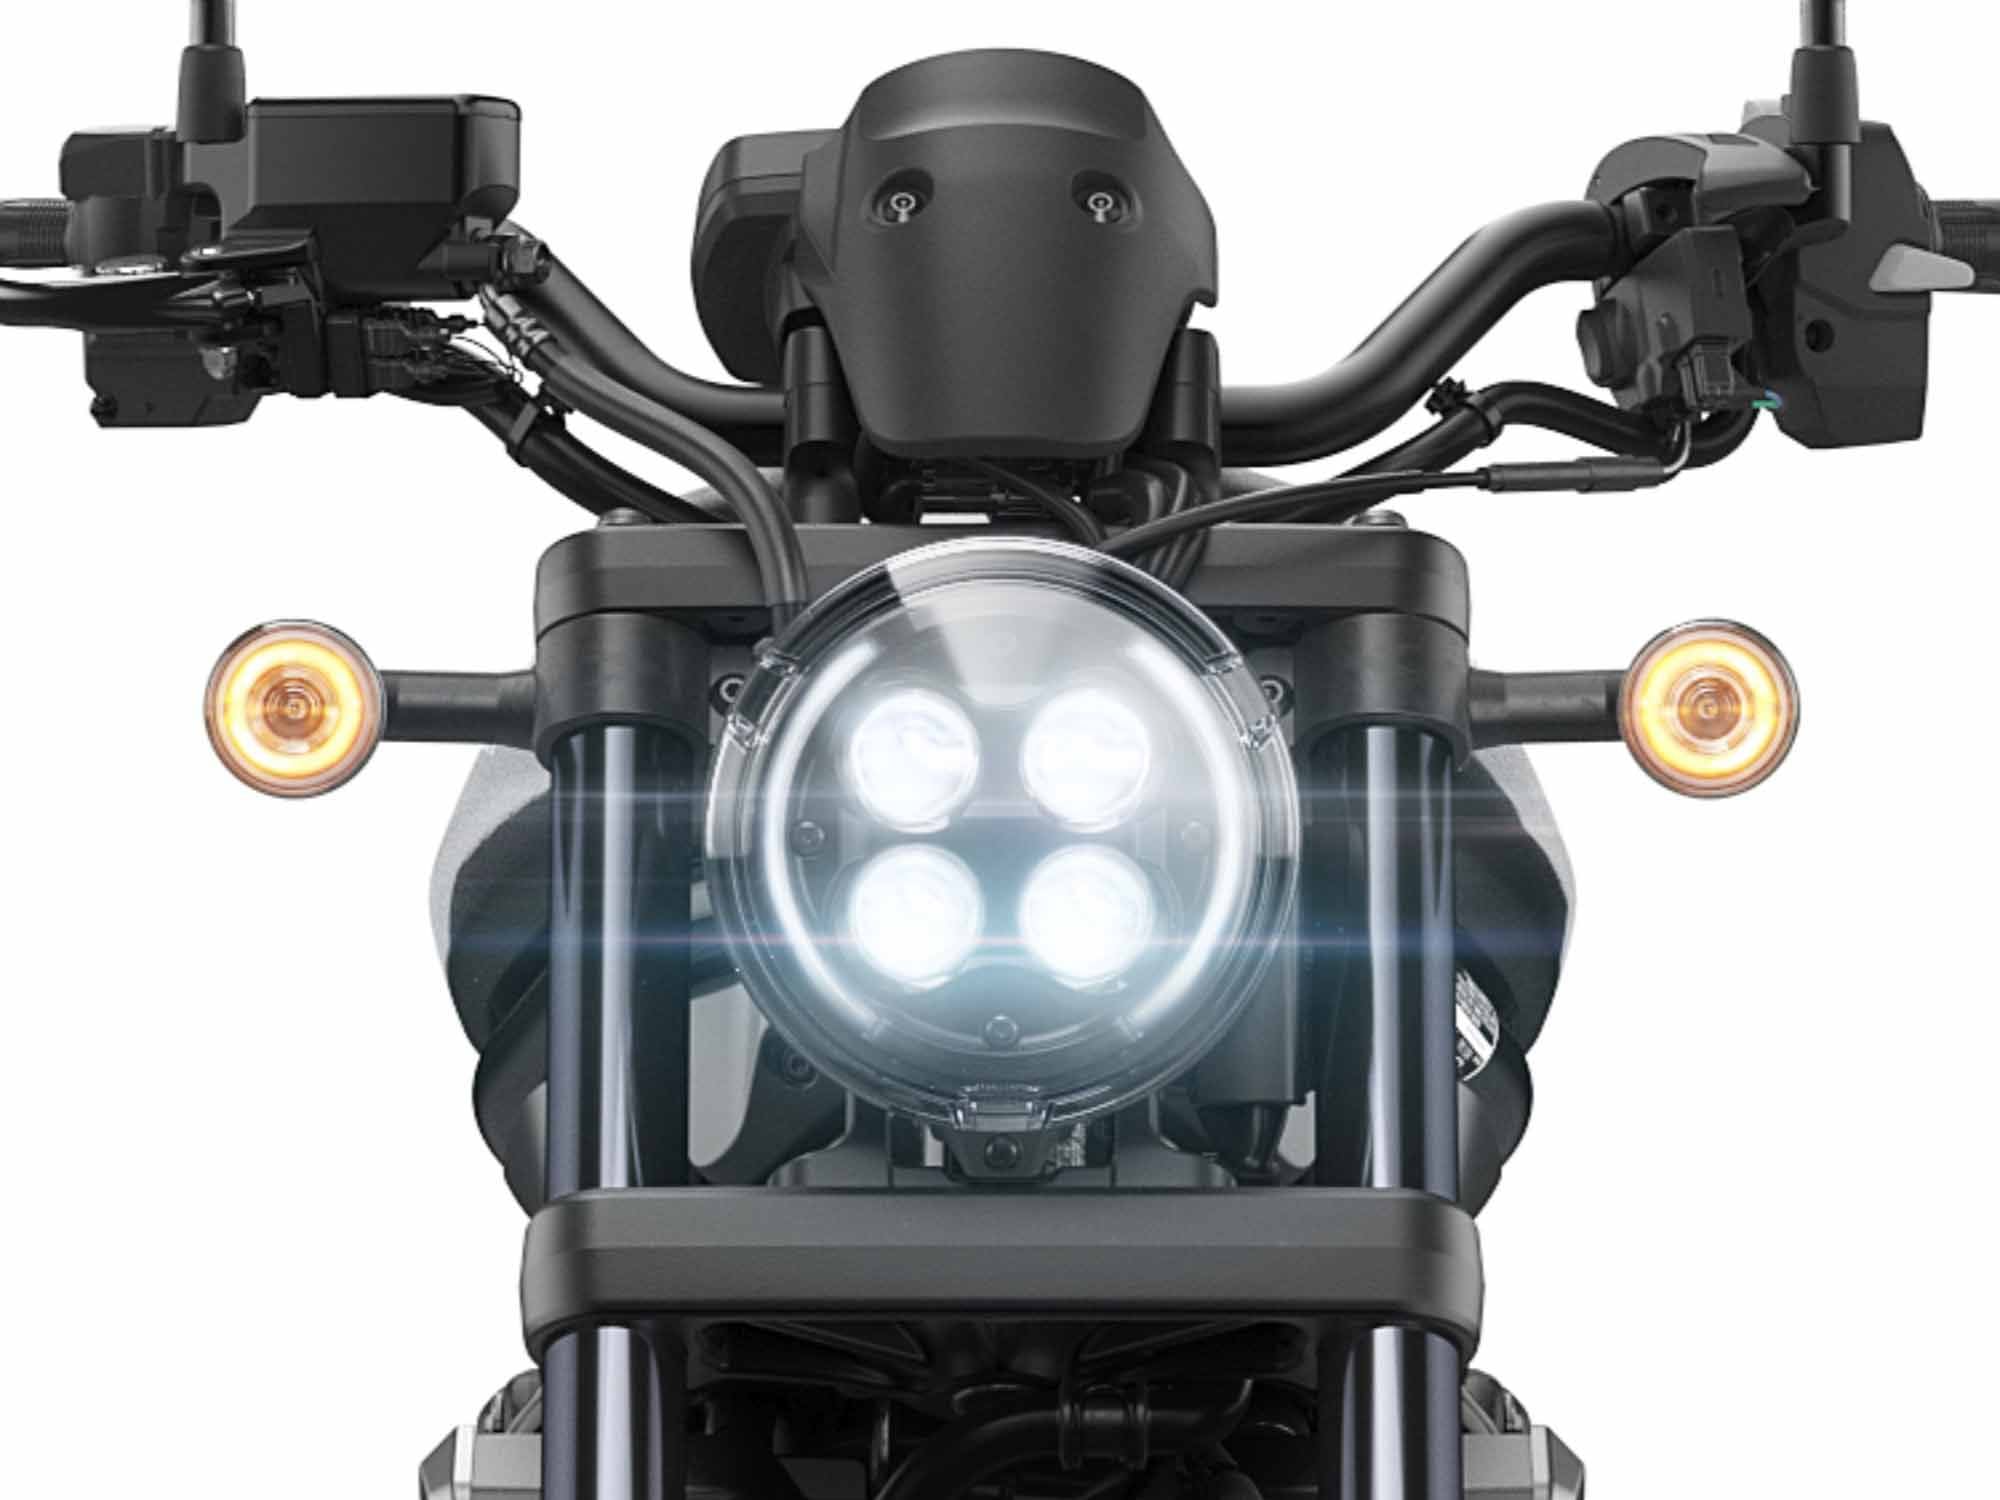 LED headlight. The Rebel 1100 has a seamless tank and steel fenders for a premium look.